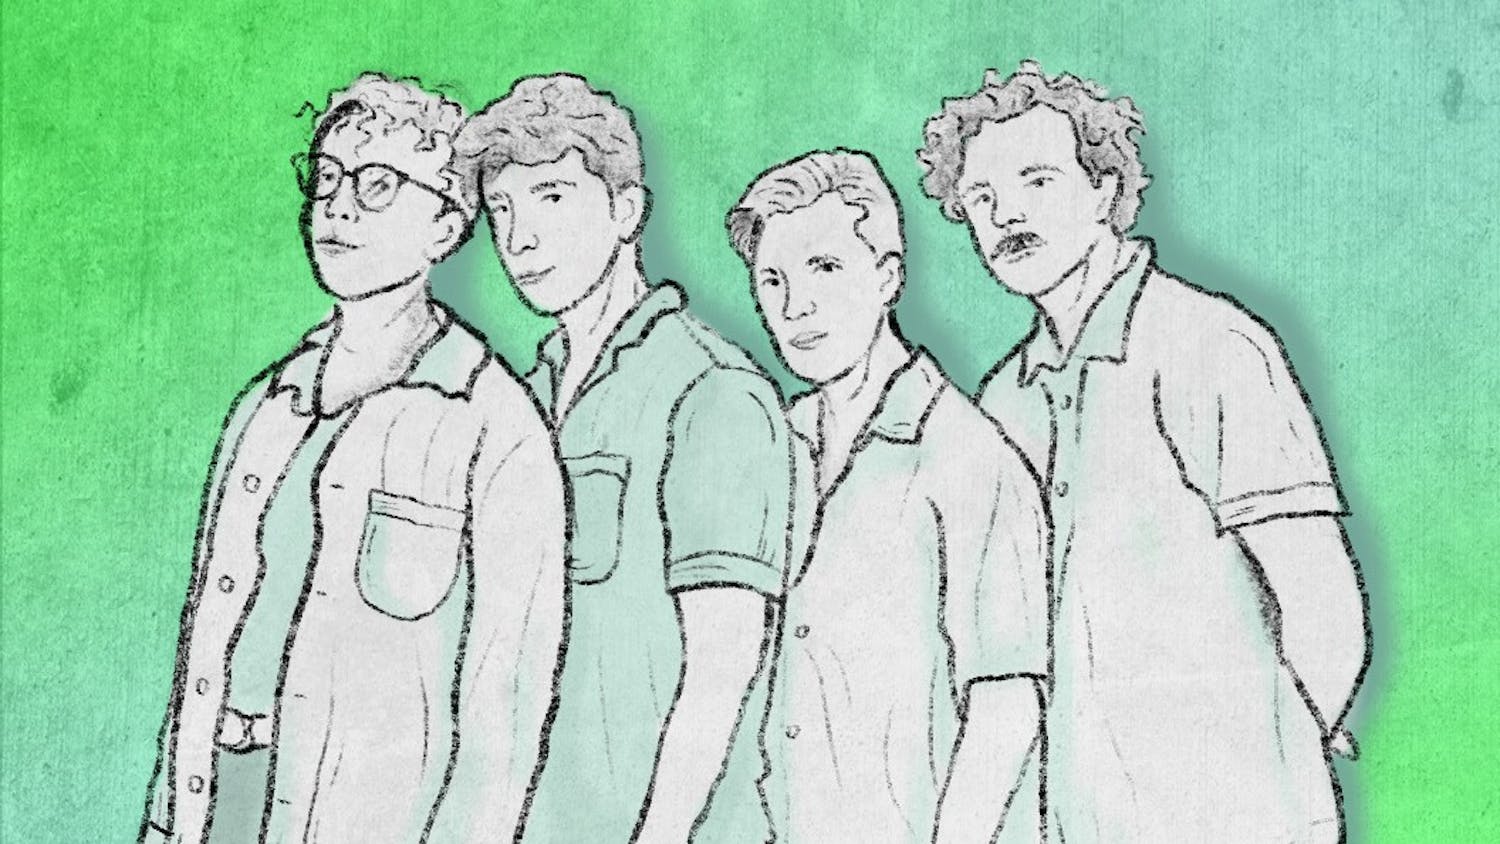 A sketch of the Florida-based band Driveaway.